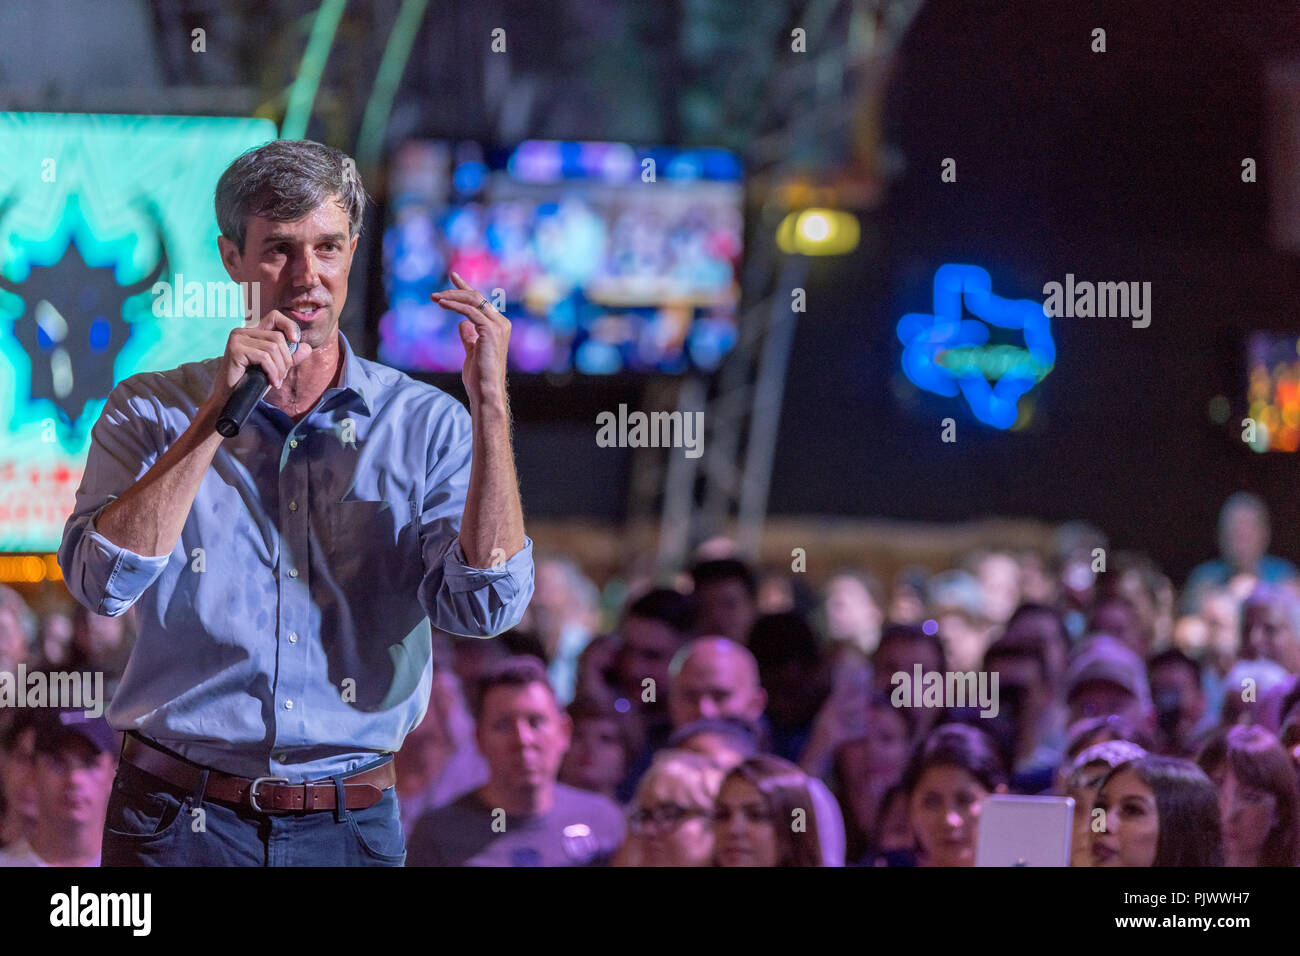 Houston, Texas, USA - September 8, 2018: Beto O'Rourke, Texas Democratic Candidate for the U.S. Senate at a Political Rally in Houston Stock Photo